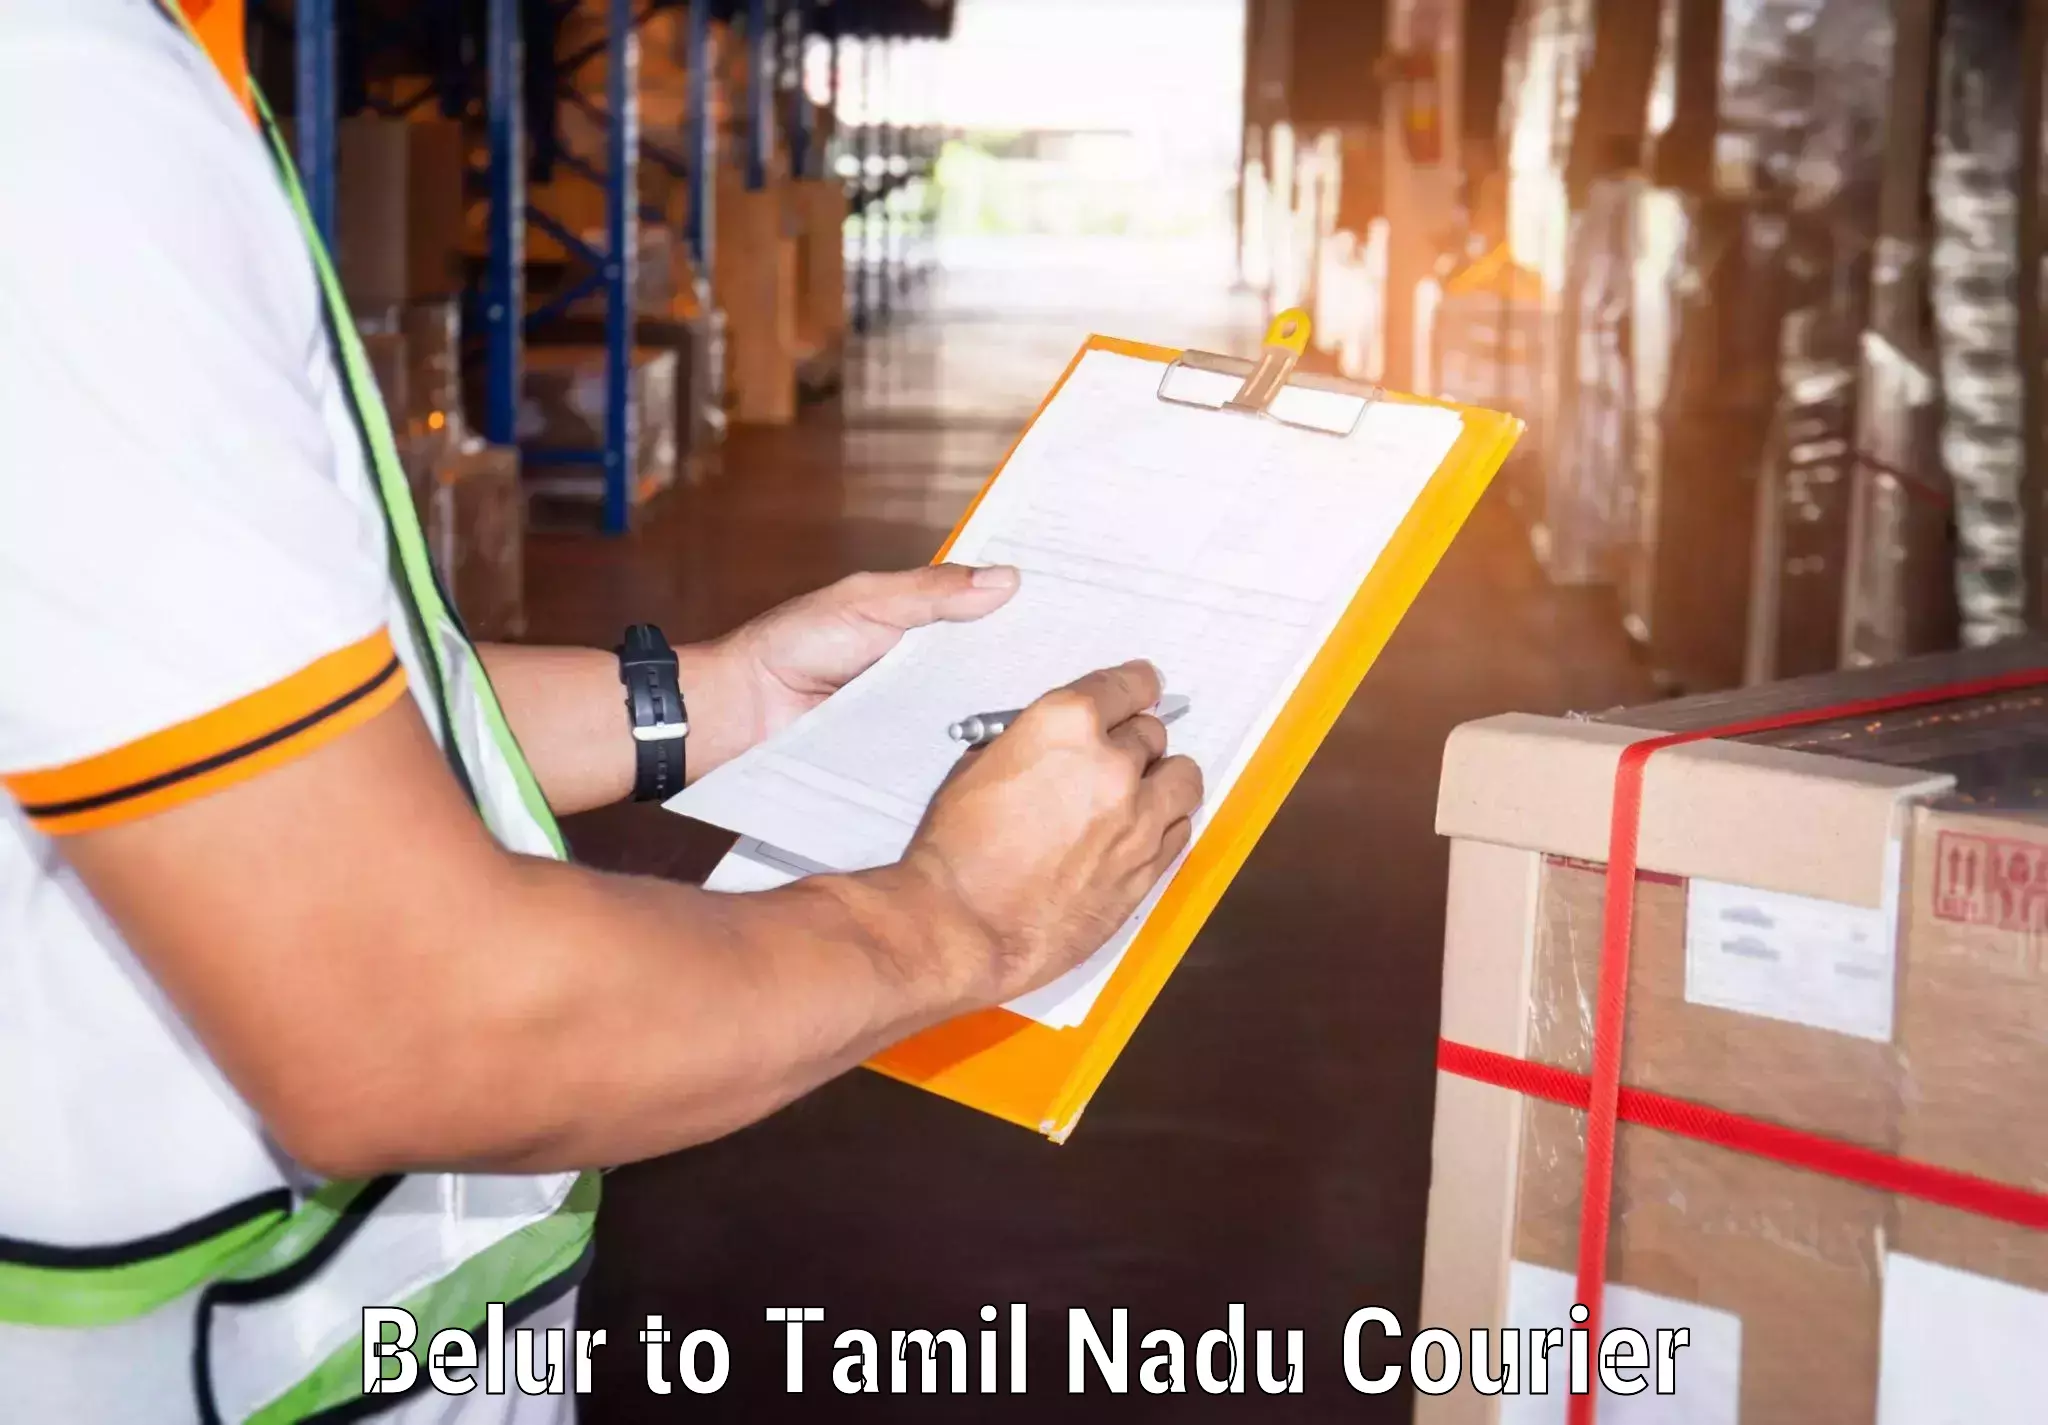 Courier service efficiency Belur to Dindigul